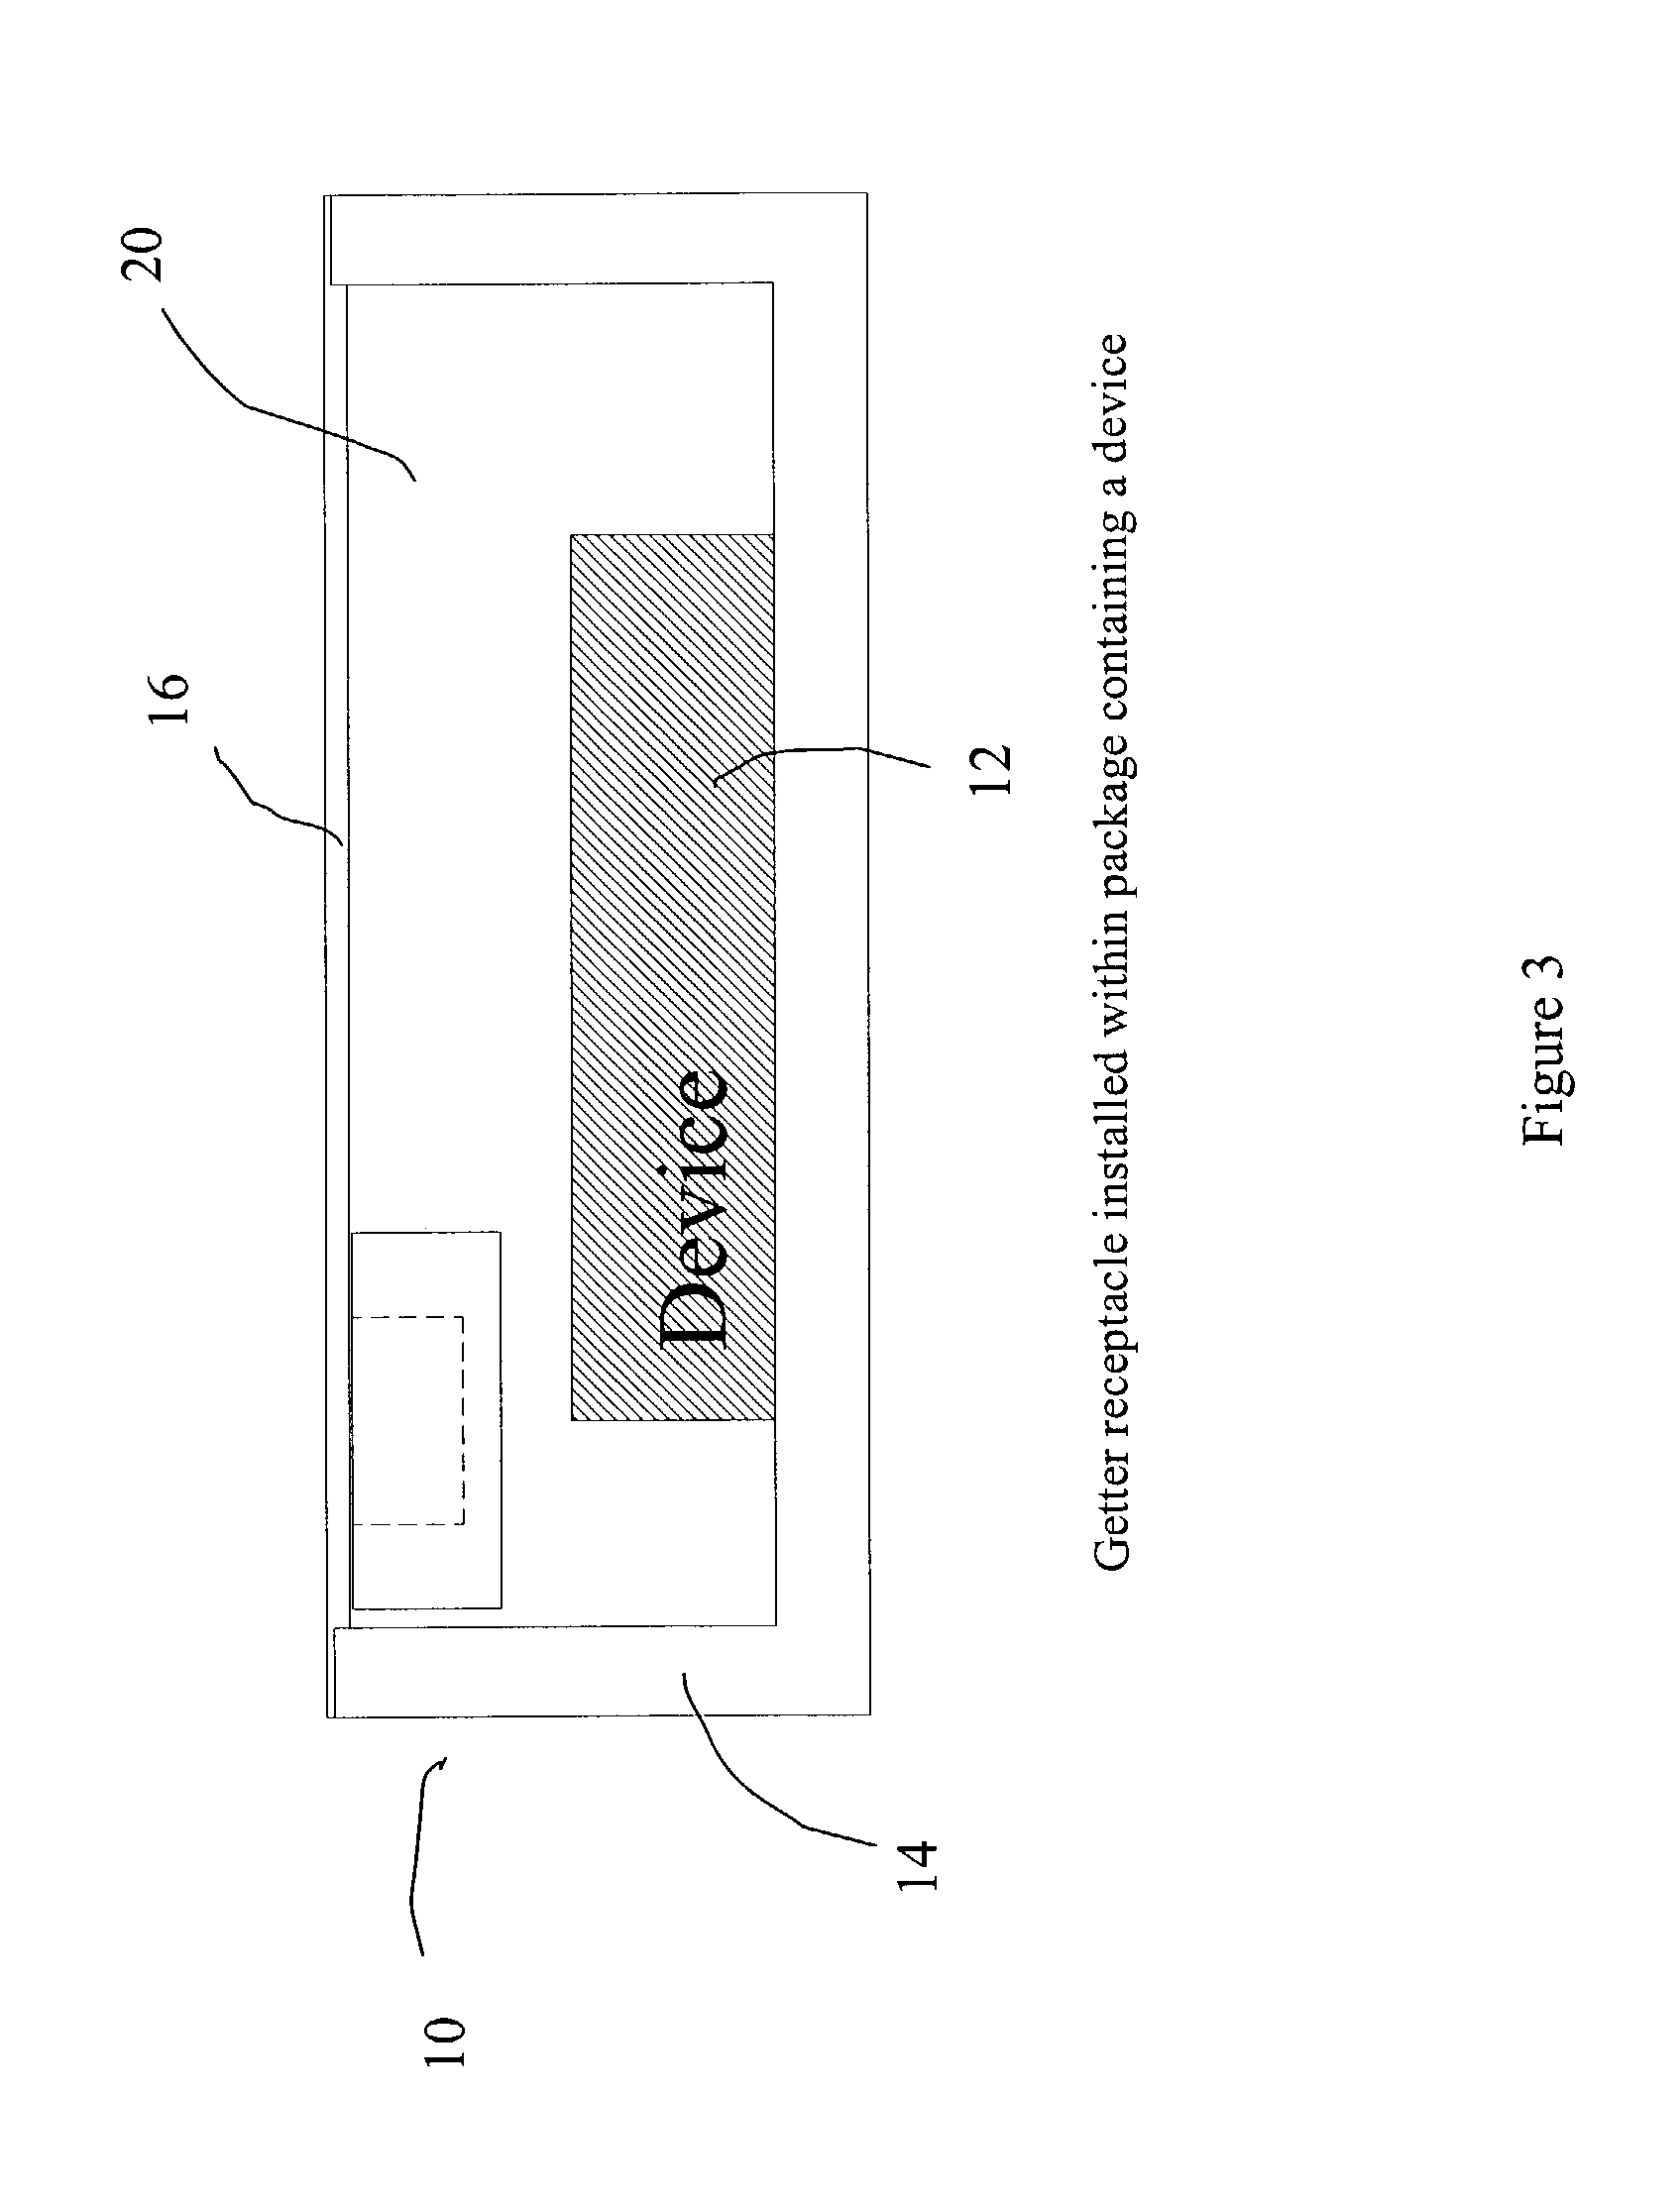 System and method for gettering gas-phase contaminants within a sealed enclosure